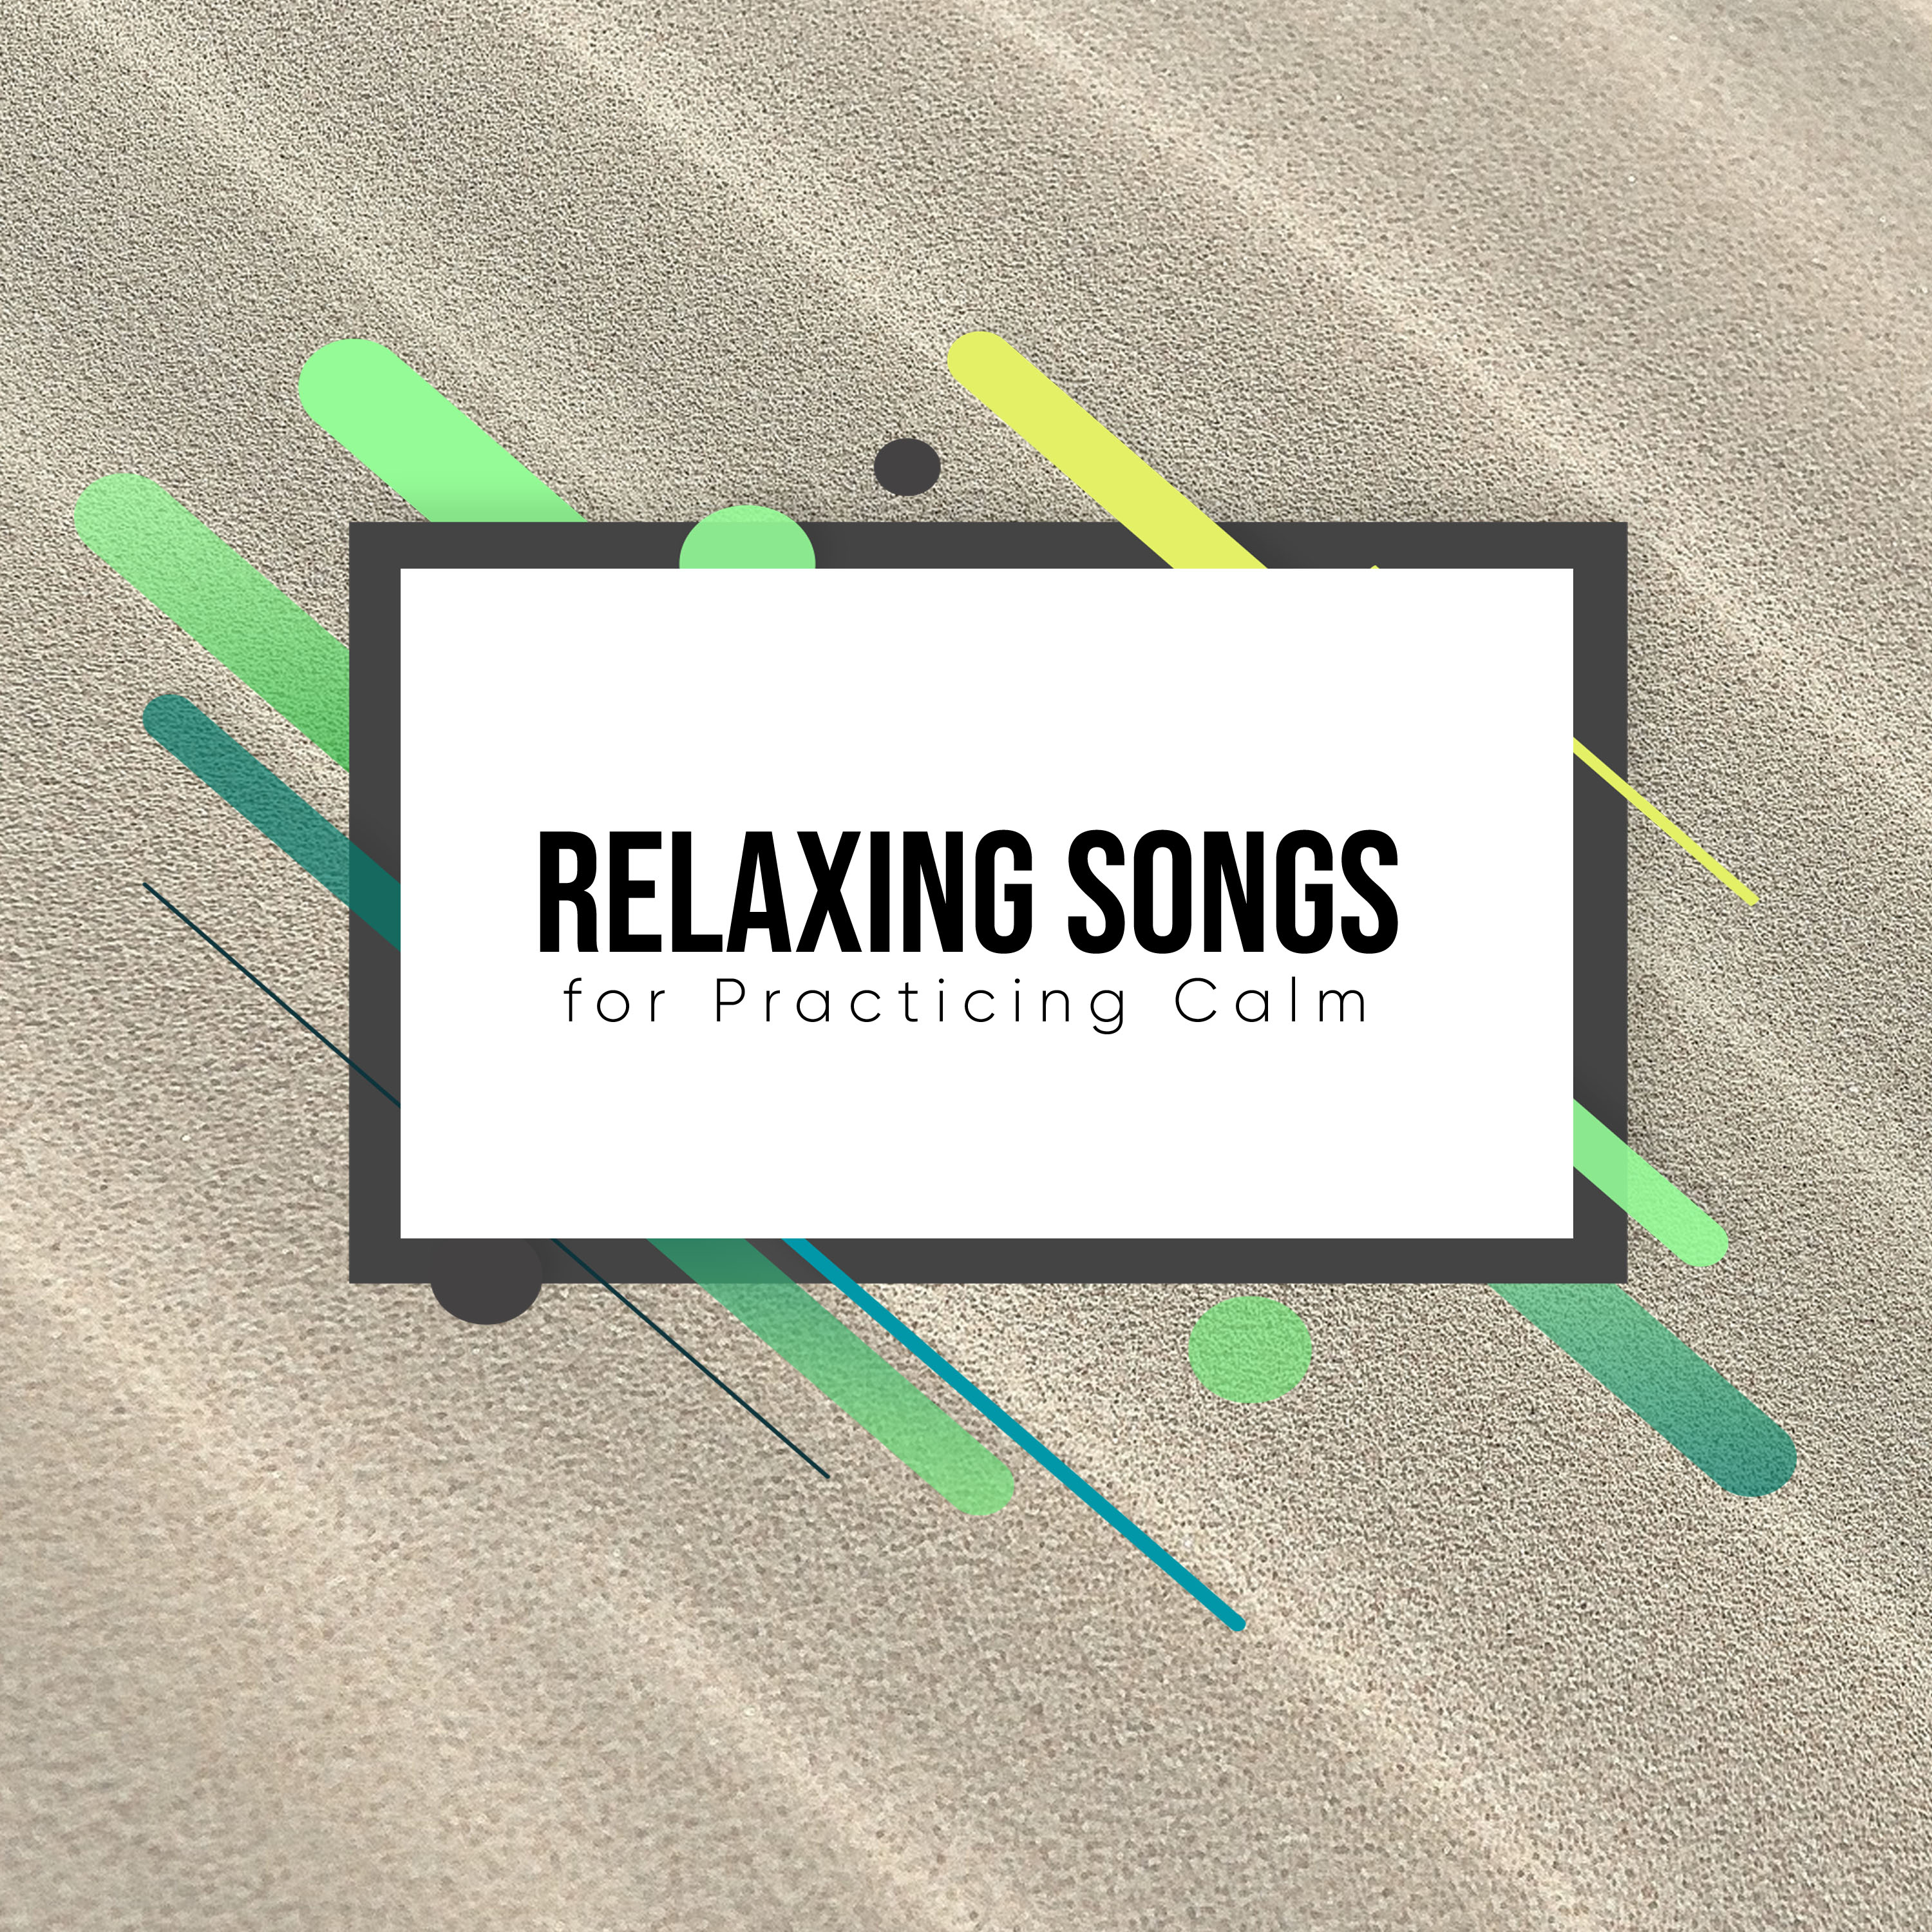 #22 Relaxing Ambience Songs for Practicing Calm